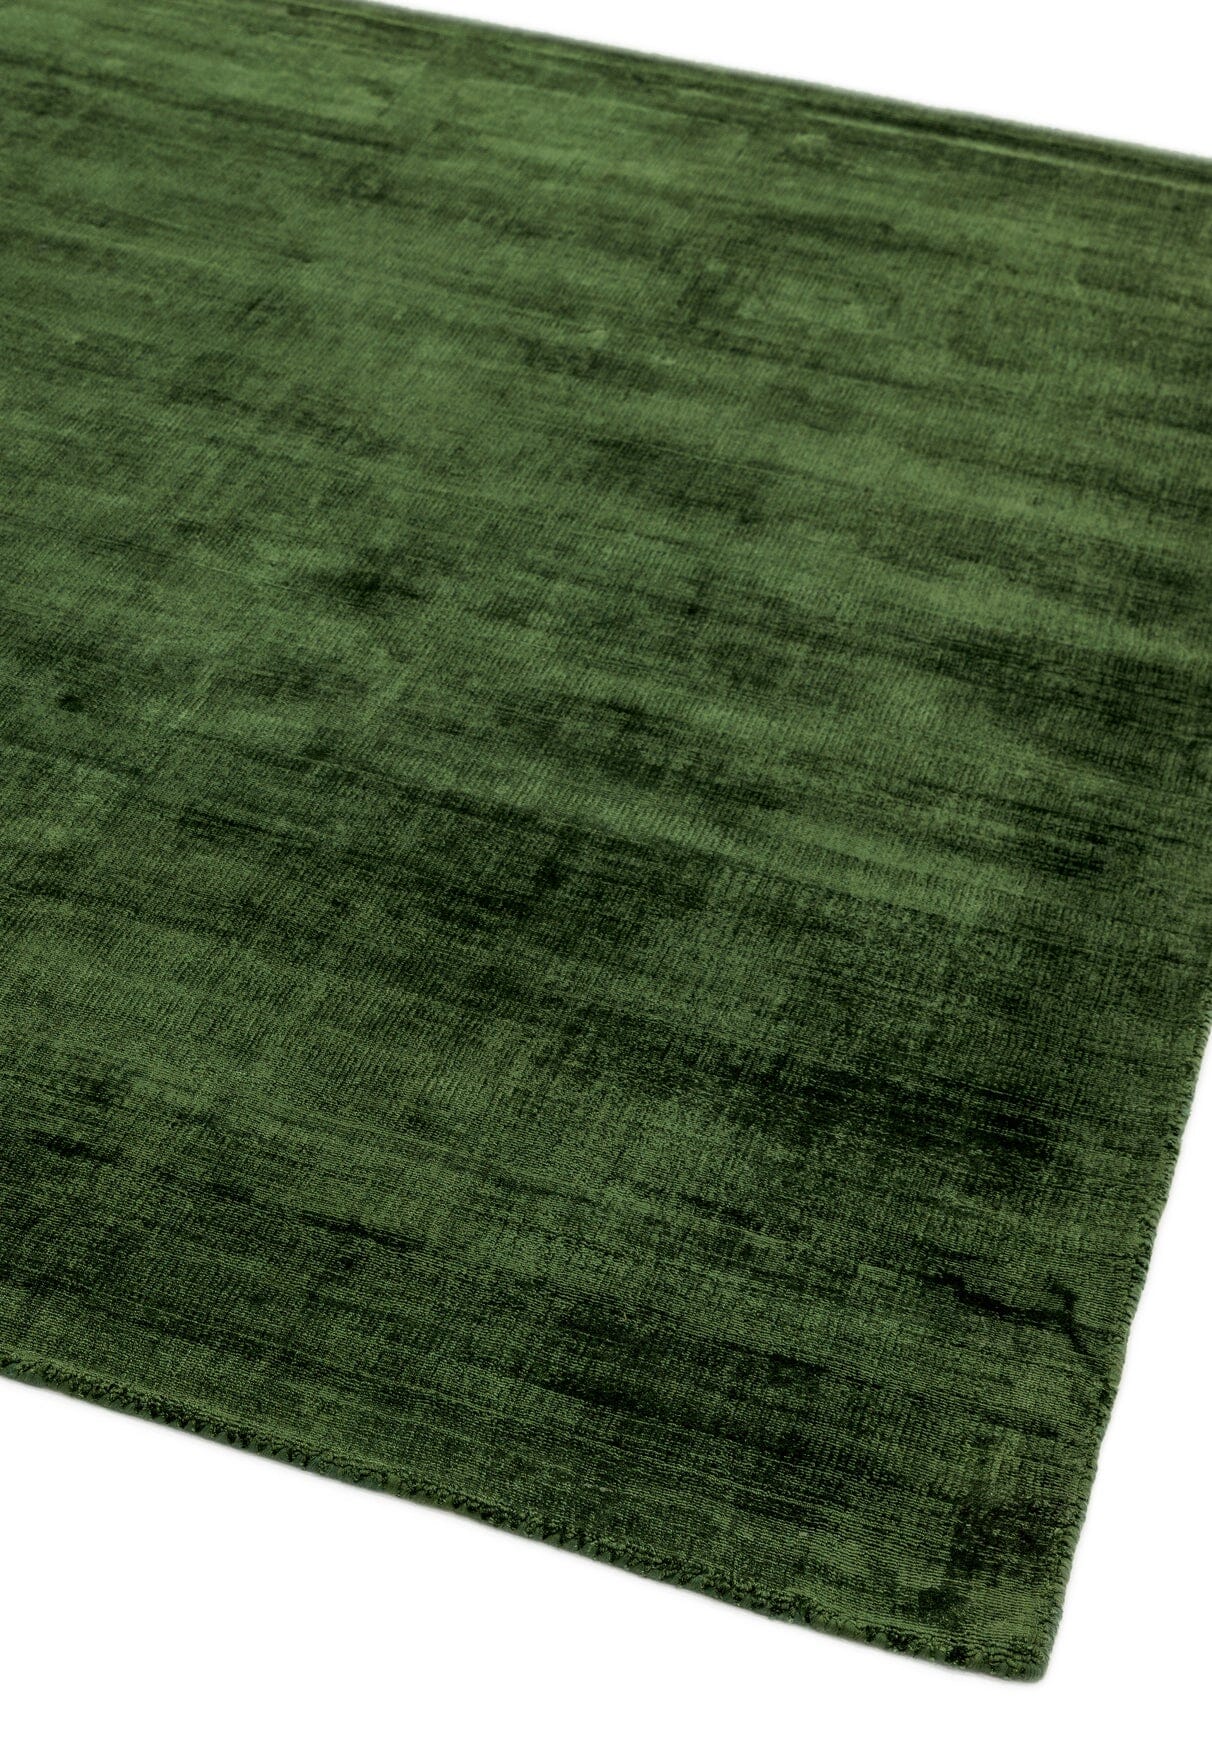  Asiatic Carpets-Asiatic Carpets Blade Hand Woven Rug Green - 240 x 340cm-Green 181 